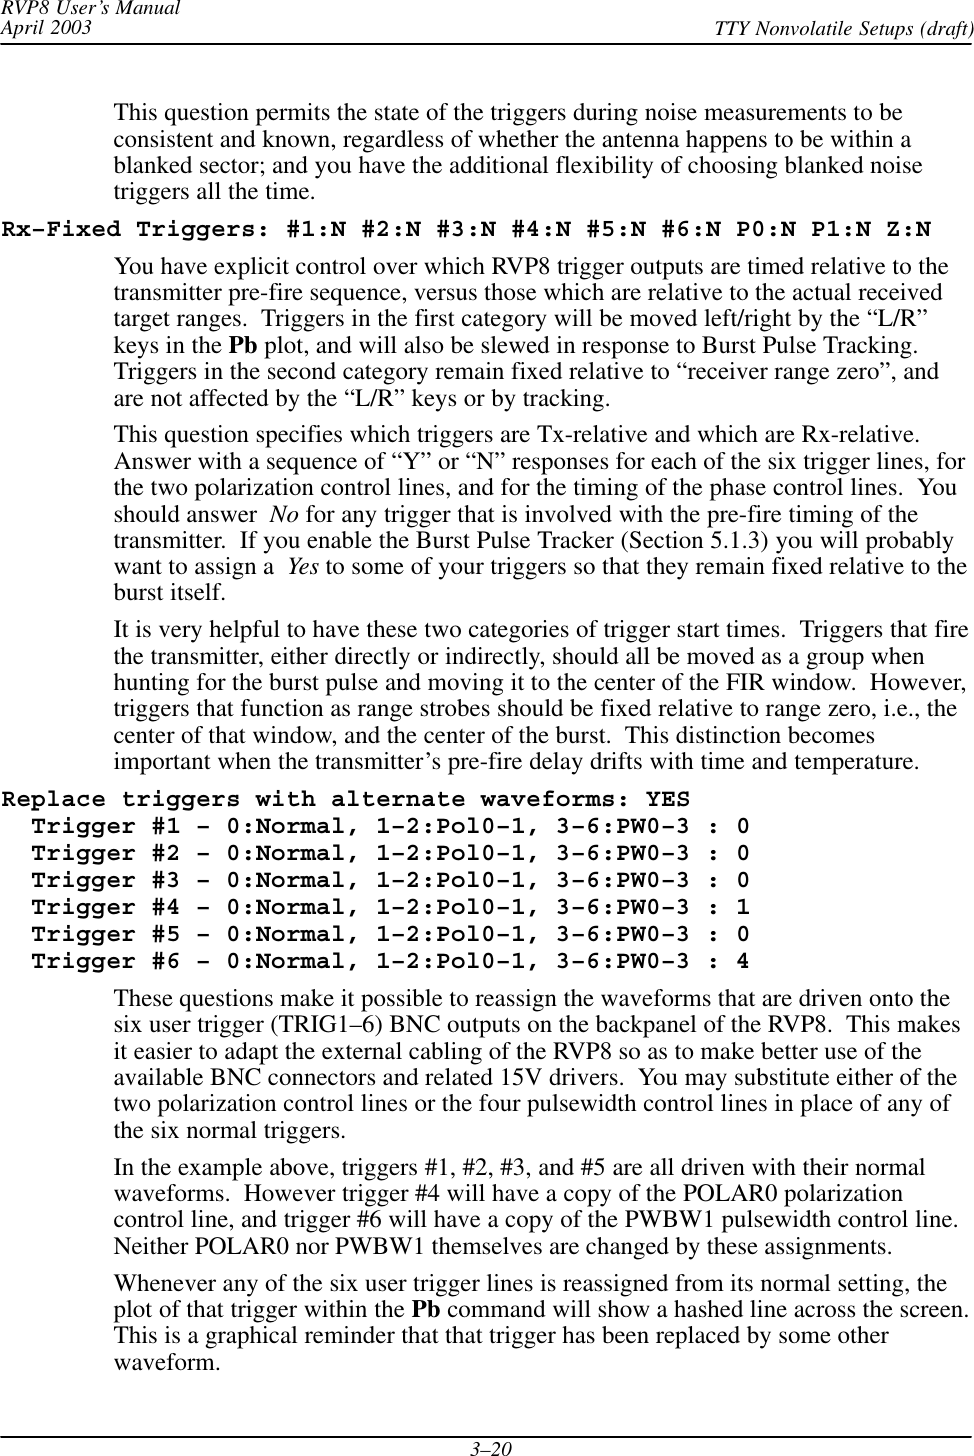 RVP8 User’s ManualApril 2003 TTY Nonvolatile Setups (draft)3–20This question permits the state of the triggers during noise measurements to beconsistent and known, regardless of whether the antenna happens to be within ablanked sector; and you have the additional flexibility of choosing blanked noisetriggers all the time.Rx–Fixed Triggers: #1:N #2:N #3:N #4:N #5:N #6:N P0:N P1:N Z:NYou have explicit control over which RVP8 trigger outputs are timed relative to thetransmitter pre-fire sequence, versus those which are relative to the actual receivedtarget ranges.  Triggers in the first category will be moved left/right by the “L/R”keys in the Pb plot, and will also be slewed in response to Burst Pulse Tracking.Triggers in the second category remain fixed relative to “receiver range zero”, andare not affected by the “L/R” keys or by tracking.This question specifies which triggers are Tx-relative and which are Rx-relative.Answer with a sequence of “Y” or “N” responses for each of the six trigger lines, forthe two polarization control lines, and for the timing of the phase control lines.  Youshould answer  No for any trigger that is involved with the pre-fire timing of thetransmitter.  If you enable the Burst Pulse Tracker (Section 5.1.3) you will probablywant to assign a Yes to some of your triggers so that they remain fixed relative to theburst itself.It is very helpful to have these two categories of trigger start times.  Triggers that firethe transmitter, either directly or indirectly, should all be moved as a group whenhunting for the burst pulse and moving it to the center of the FIR window.  However,triggers that function as range strobes should be fixed relative to range zero, i.e., thecenter of that window, and the center of the burst.  This distinction becomesimportant when the transmitter’s pre-fire delay drifts with time and temperature.Replace triggers with alternate waveforms: YES  Trigger #1 – 0:Normal, 1–2:Pol0–1, 3–6:PW0–3 : 0  Trigger #2 – 0:Normal, 1–2:Pol0–1, 3–6:PW0–3 : 0  Trigger #3 – 0:Normal, 1–2:Pol0–1, 3–6:PW0–3 : 0  Trigger #4 – 0:Normal, 1–2:Pol0–1, 3–6:PW0–3 : 1  Trigger #5 – 0:Normal, 1–2:Pol0–1, 3–6:PW0–3 : 0  Trigger #6 – 0:Normal, 1–2:Pol0–1, 3–6:PW0–3 : 4These questions make it possible to reassign the waveforms that are driven onto thesix user trigger (TRIG1–6) BNC outputs on the backpanel of the RVP8.  This makesit easier to adapt the external cabling of the RVP8 so as to make better use of theavailable BNC connectors and related 15V drivers.  You may substitute either of thetwo polarization control lines or the four pulsewidth control lines in place of any ofthe six normal triggers.In the example above, triggers #1, #2, #3, and #5 are all driven with their normalwaveforms.  However trigger #4 will have a copy of the POLAR0 polarizationcontrol line, and trigger #6 will have a copy of the PWBW1 pulsewidth control line.Neither POLAR0 nor PWBW1 themselves are changed by these assignments.Whenever any of the six user trigger lines is reassigned from its normal setting, theplot of that trigger within the Pb command will show a hashed line across the screen.This is a graphical reminder that that trigger has been replaced by some otherwaveform.